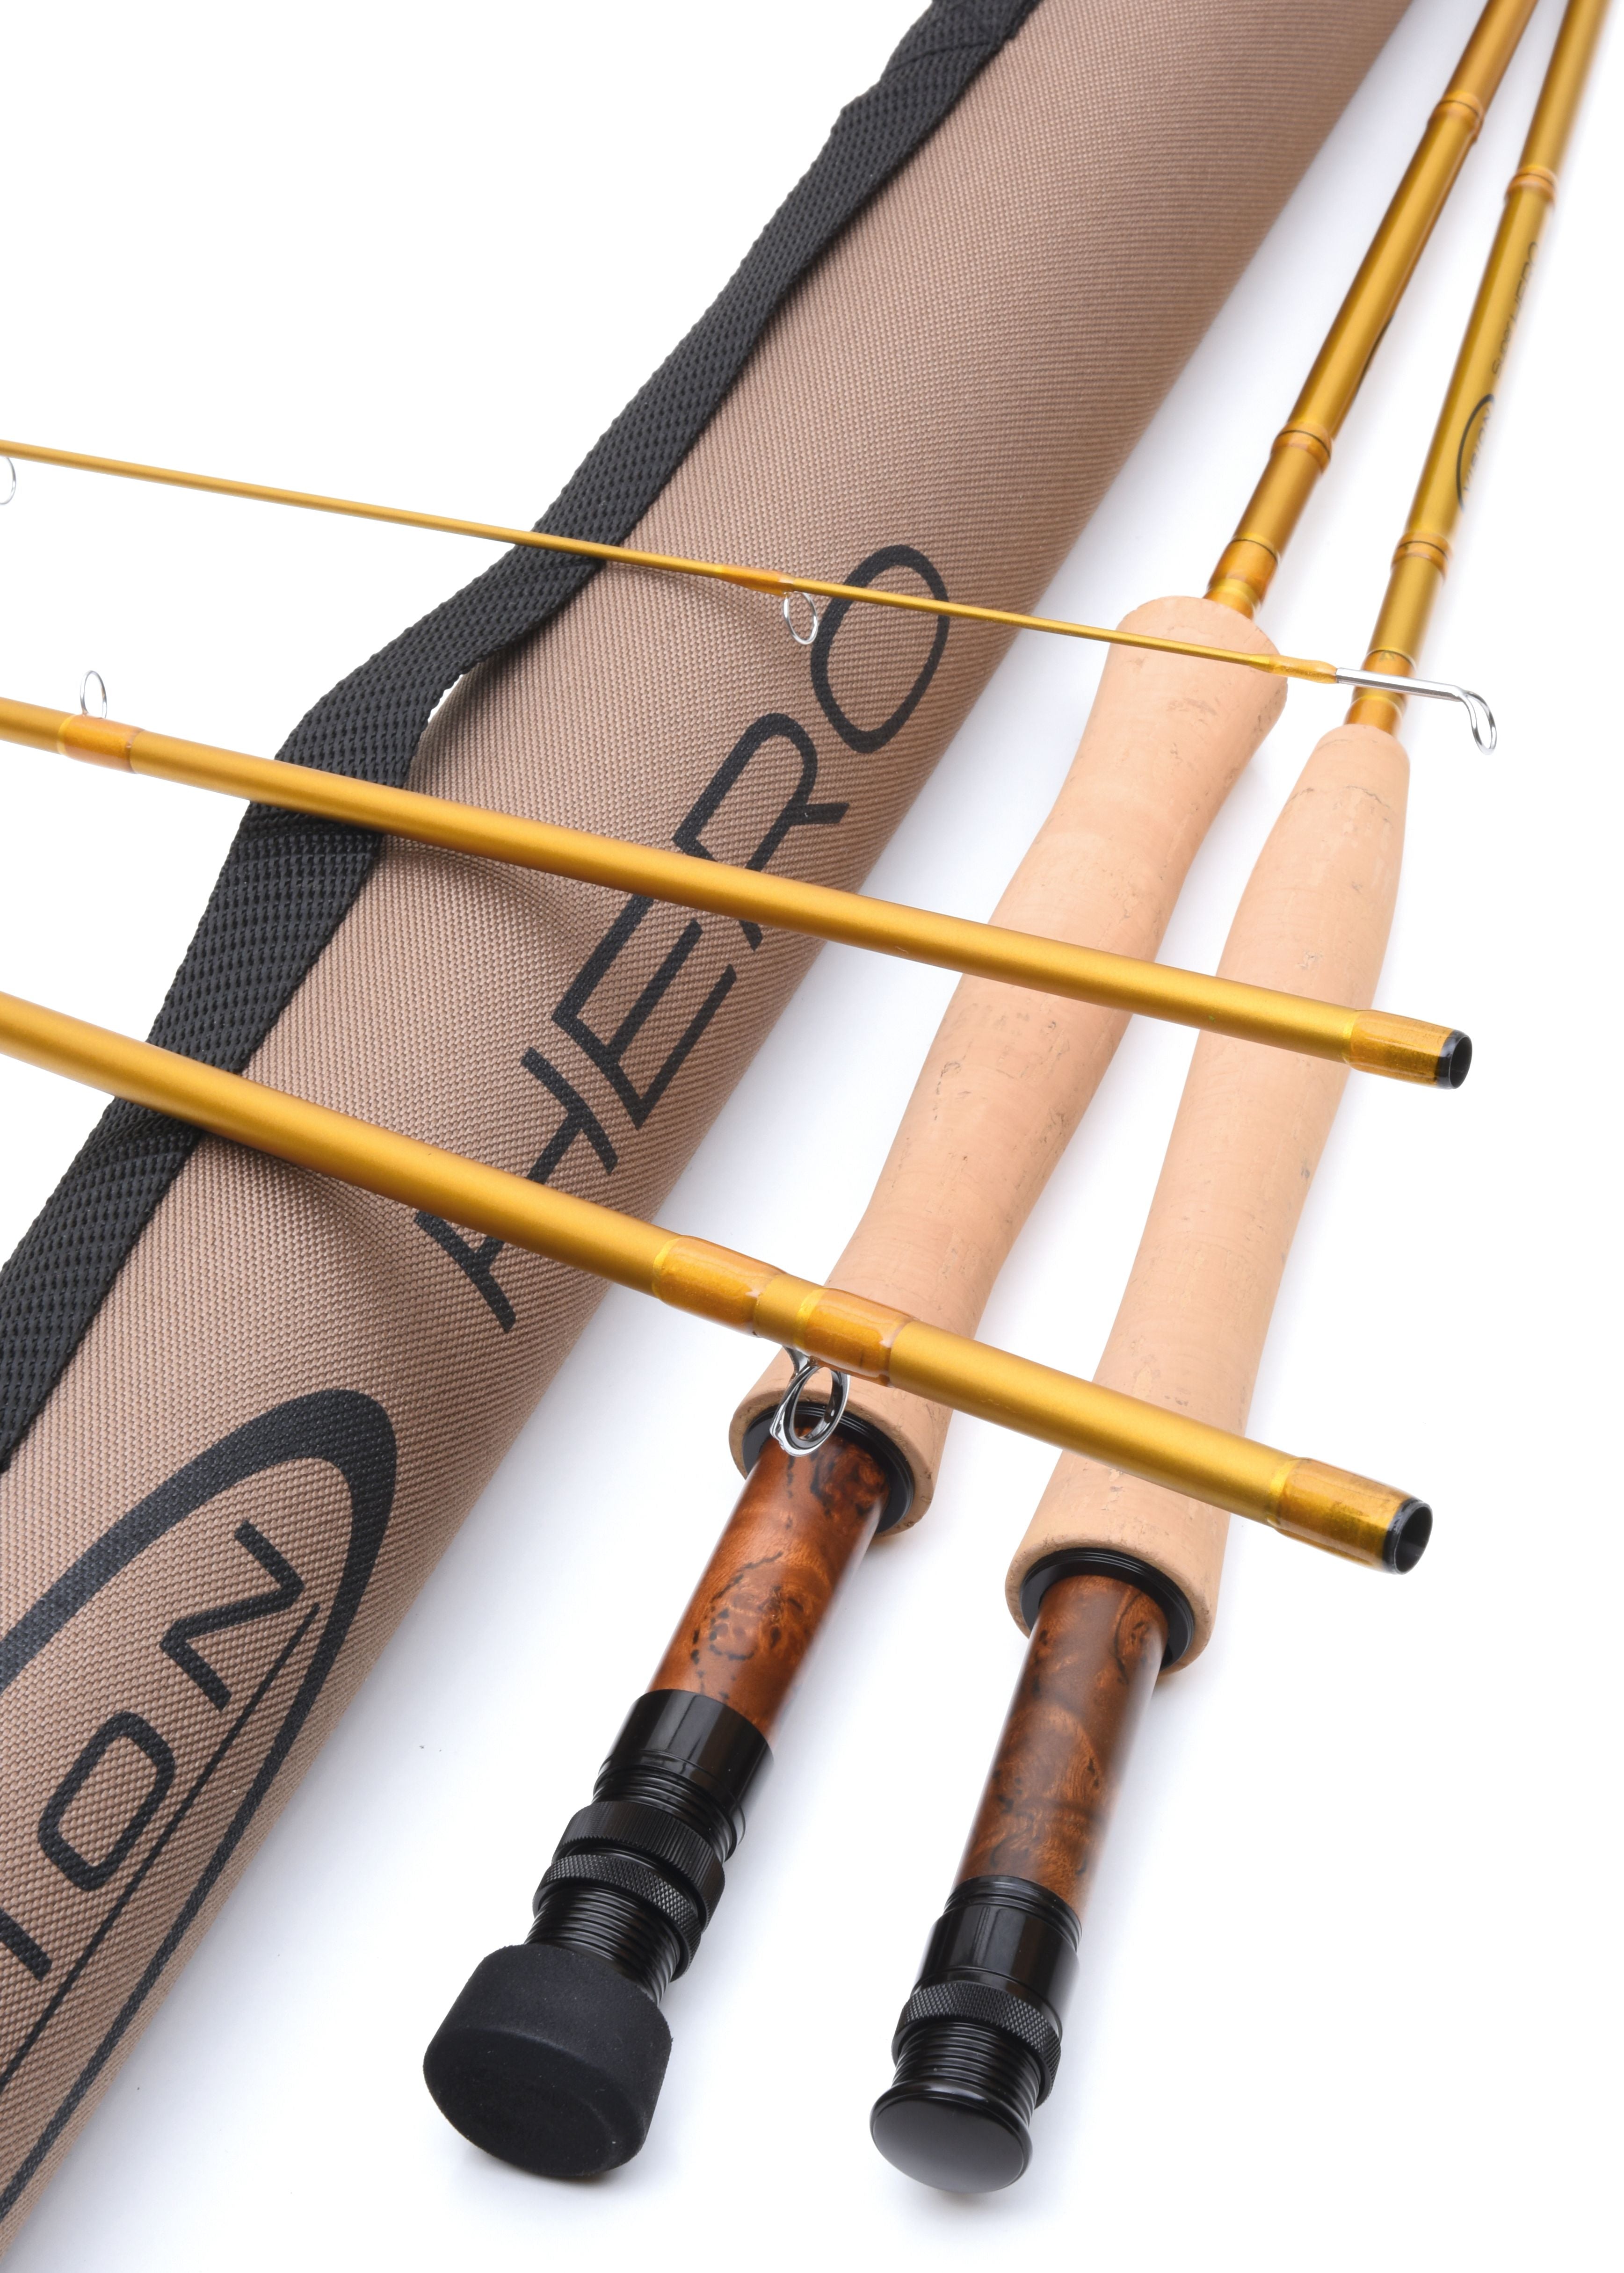 VISION HERO FLY RODS